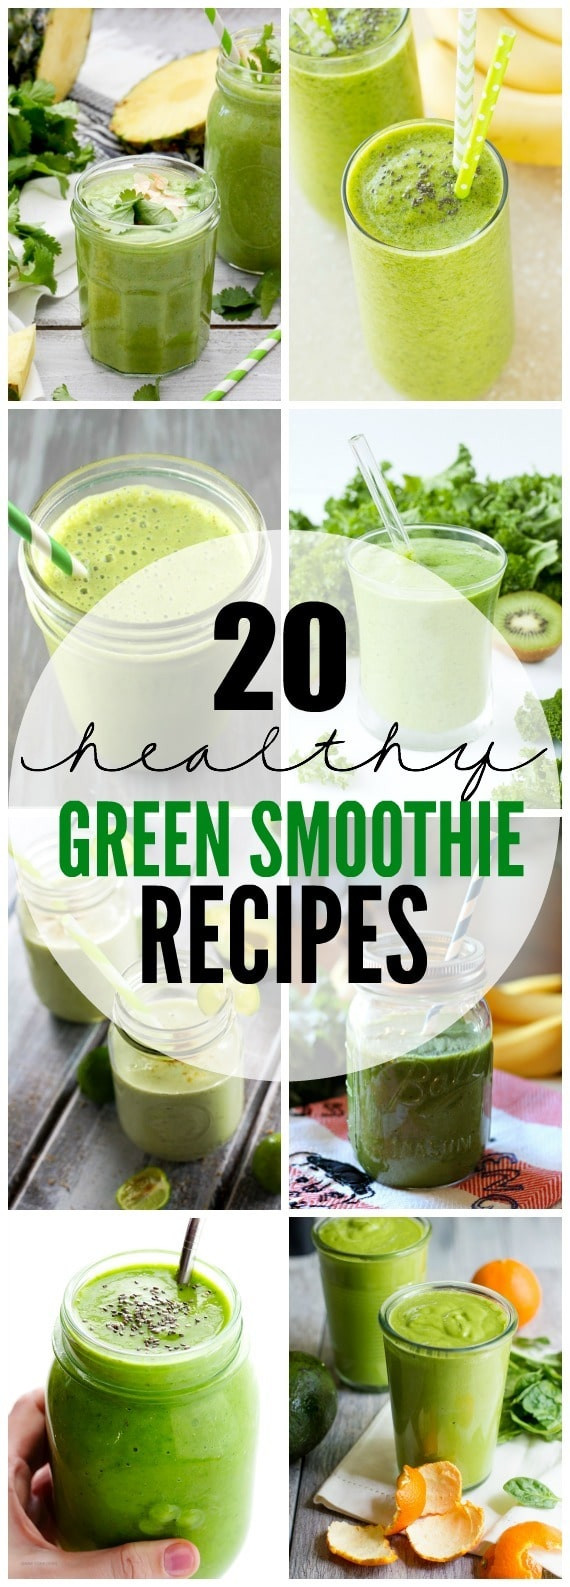 Healthy Green Smoothie Recipes
 20 Healthy Green Smoothie Recipes Yummy Healthy Easy